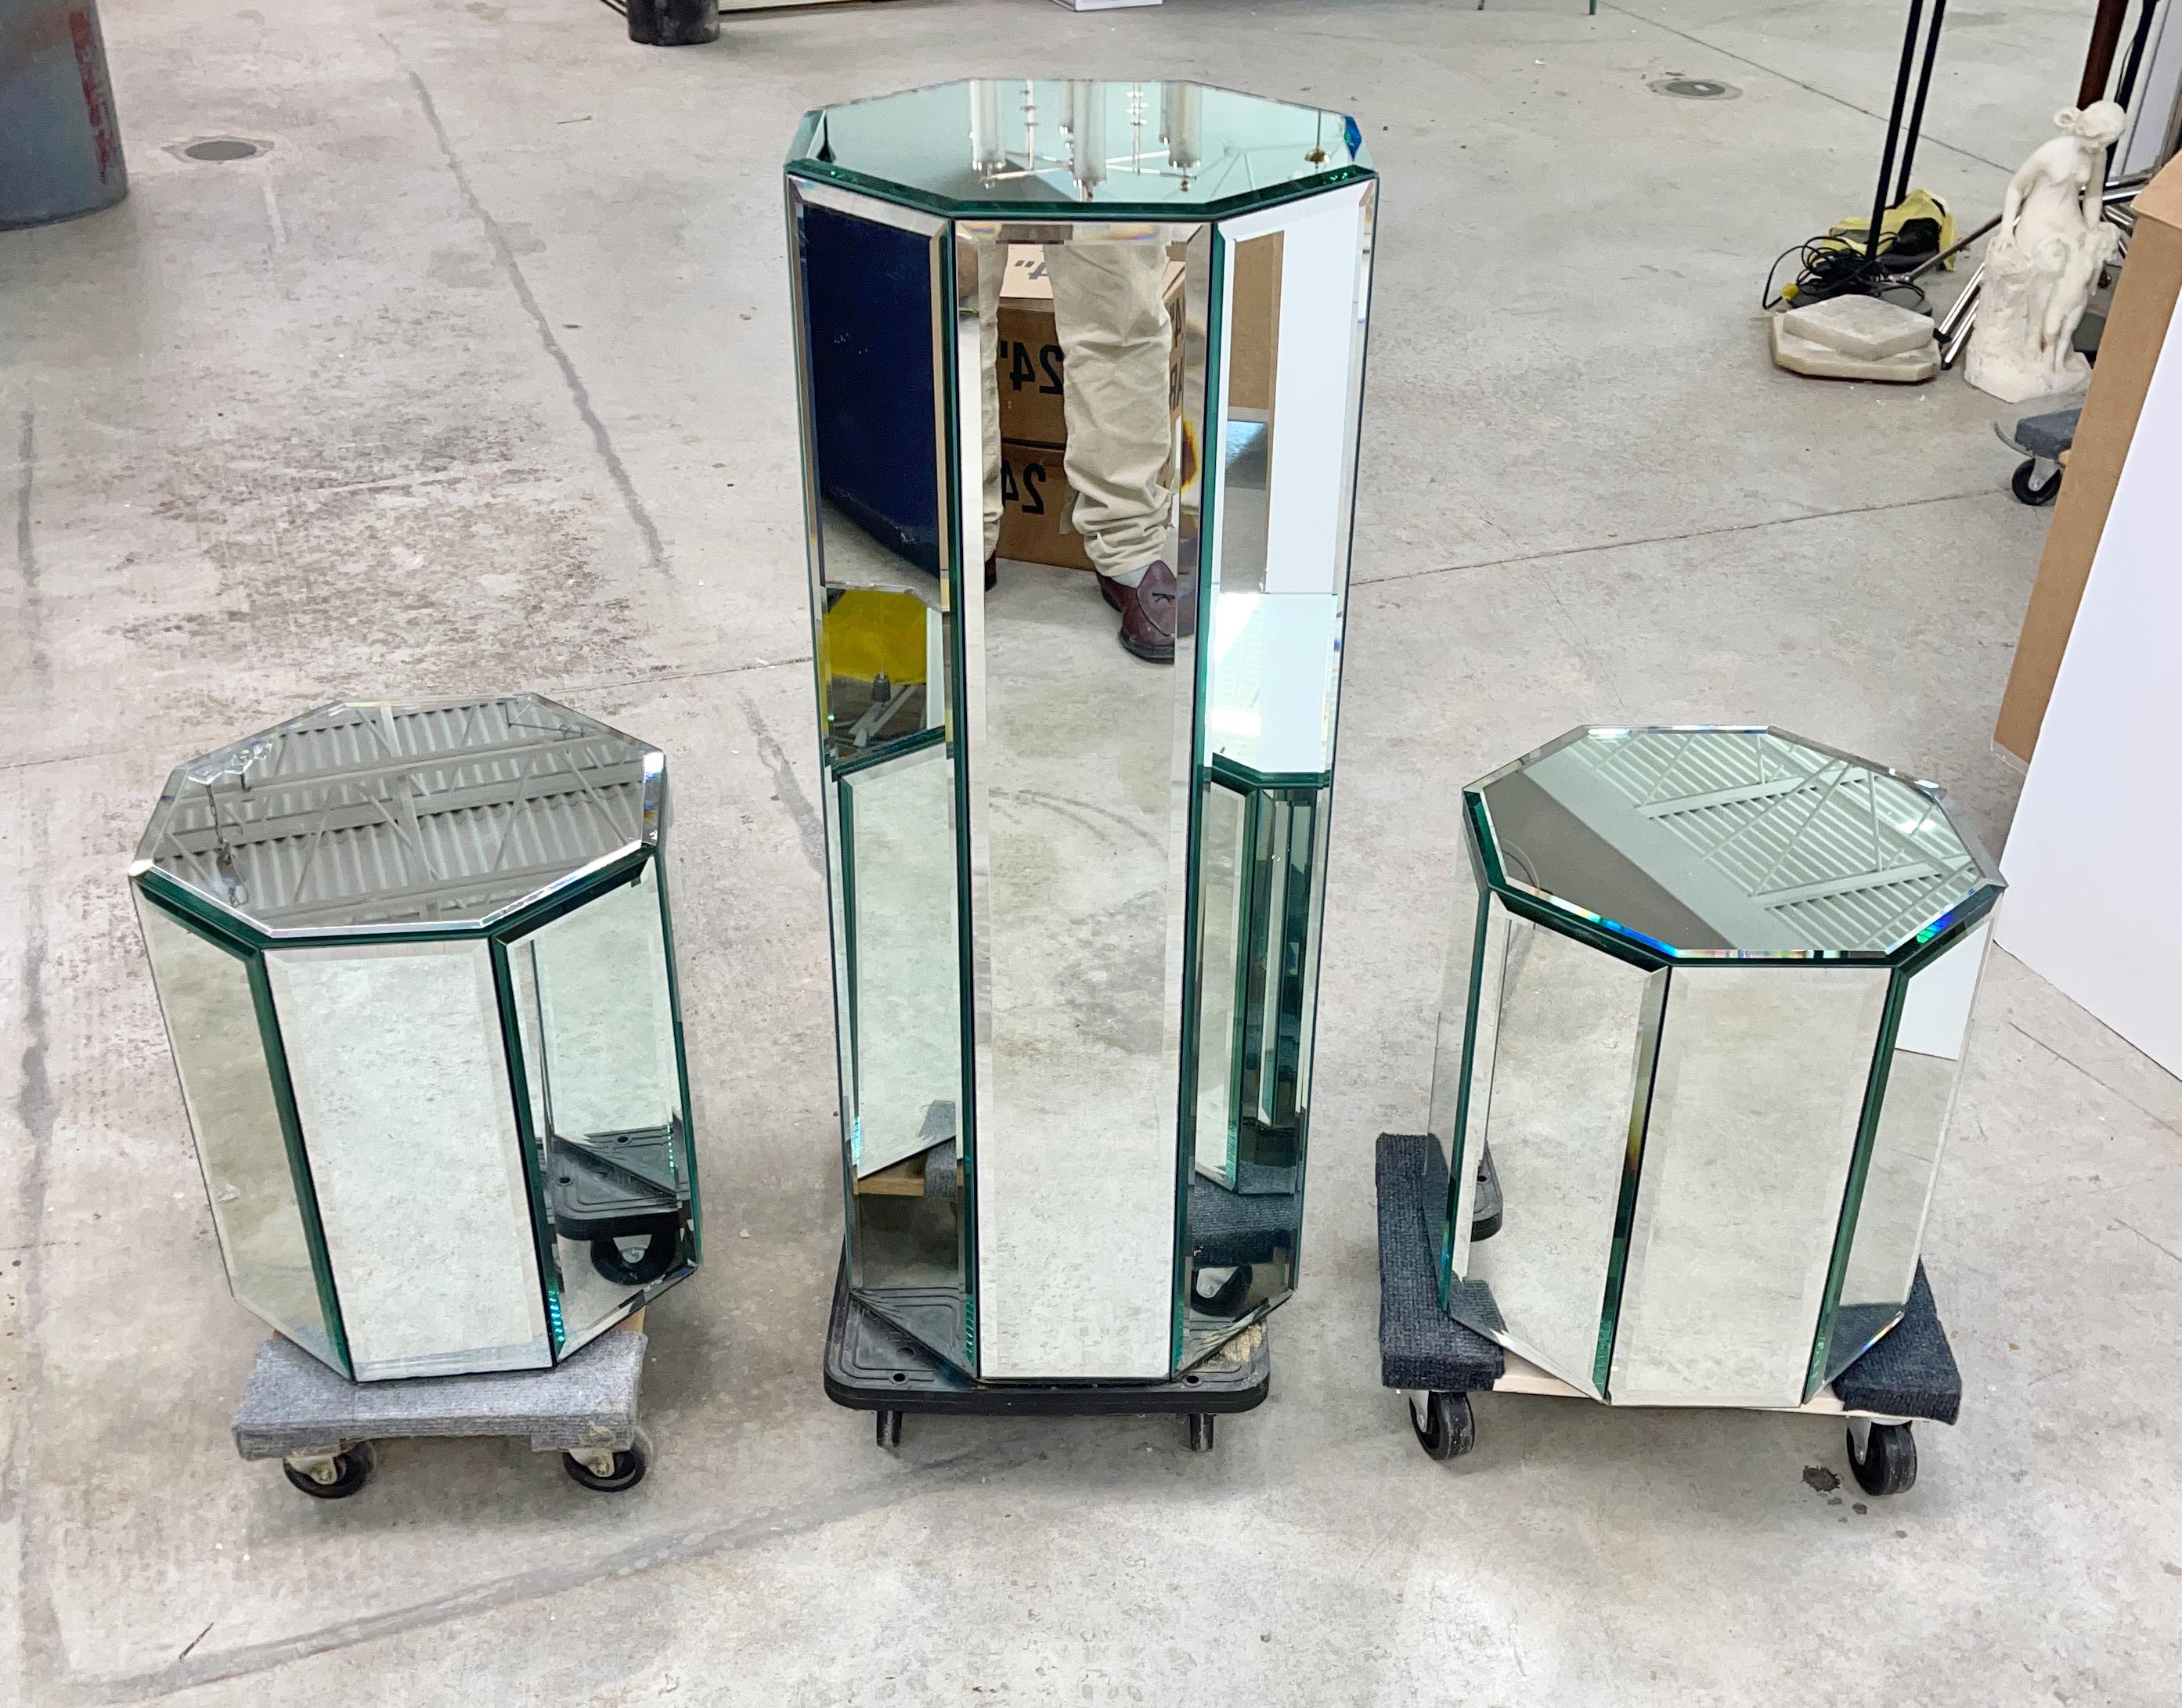 Set of three octagonal form pedestal column display stands paneled in beveled mirrored glass designed by O. B. Solie for Ello Furniture Manufacturing Co. of Rockford, IL.
Each is 15 inches diameter.
The tall one is 36.5 inches high.
The pair of